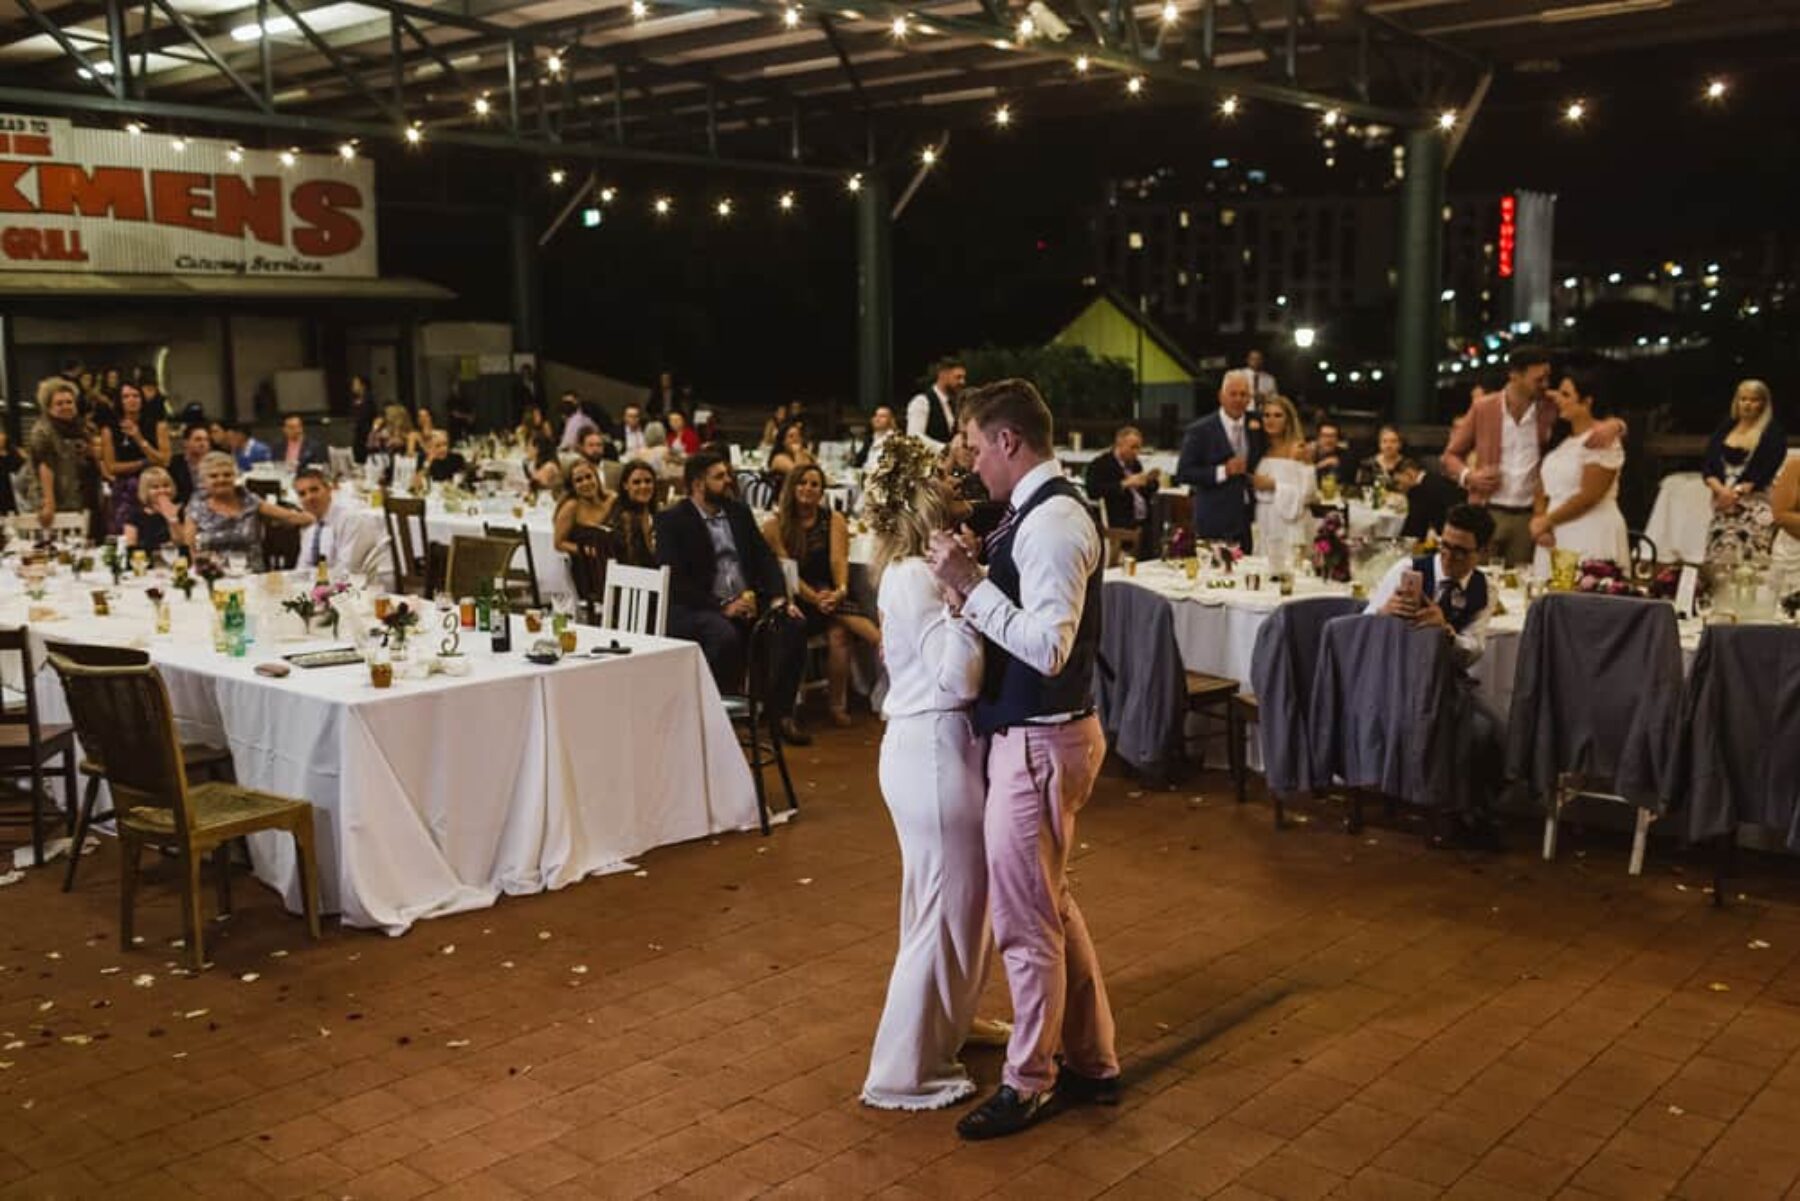 quirky & colourful wedding at Brisbane Showgrounds - photography by Janneke Storm